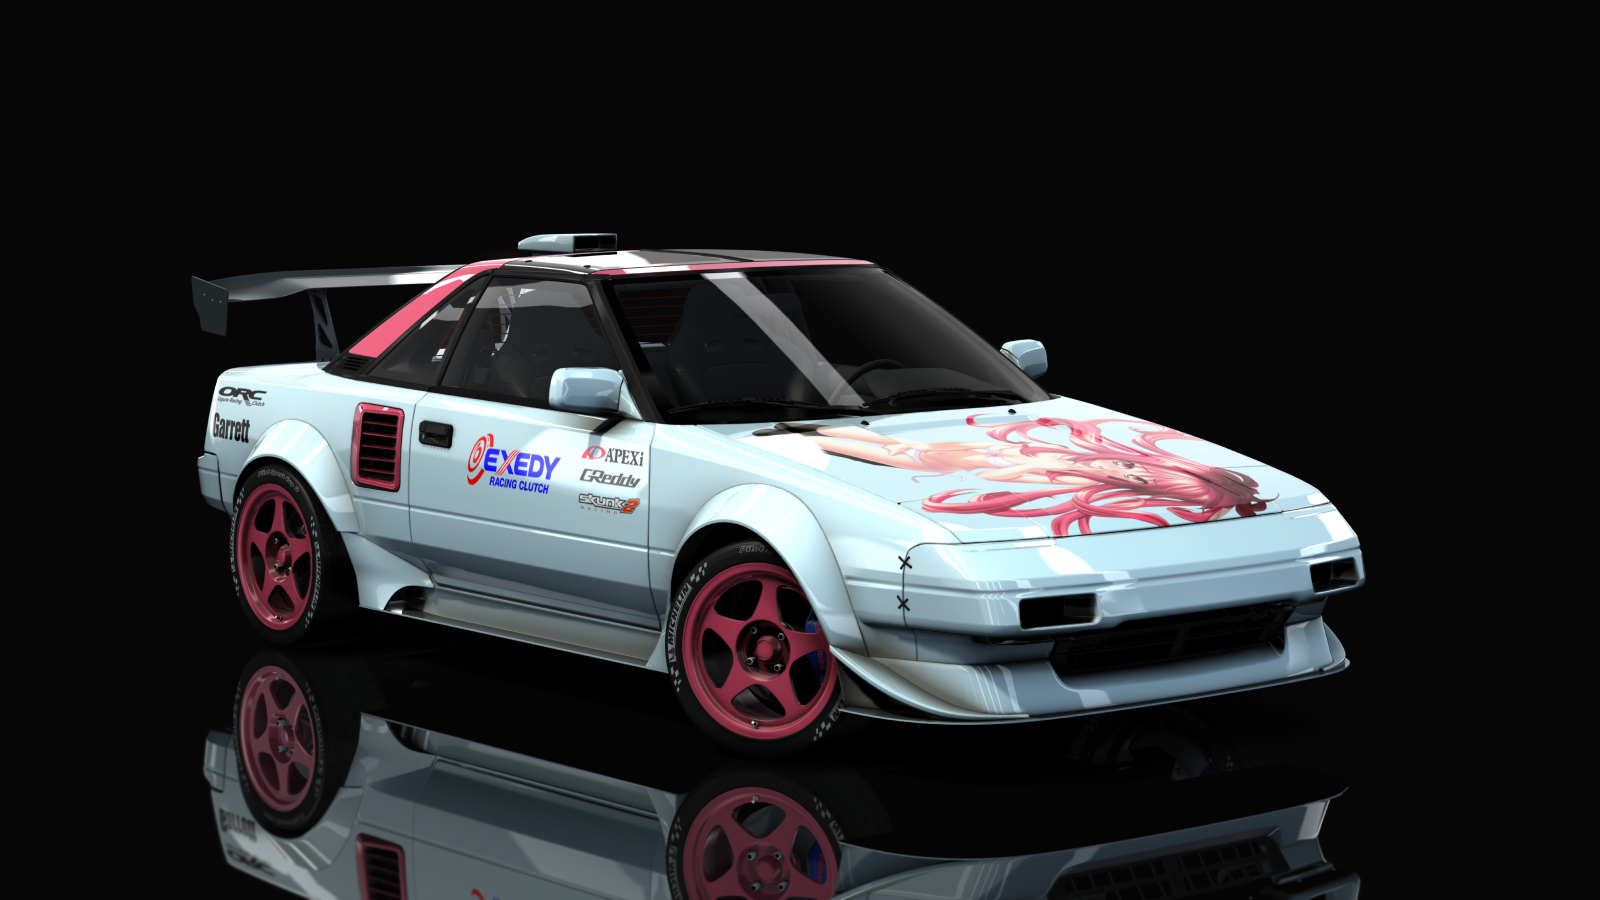 Toyota MR2 SC AW11 Time Attack, skin _AnimeRacers